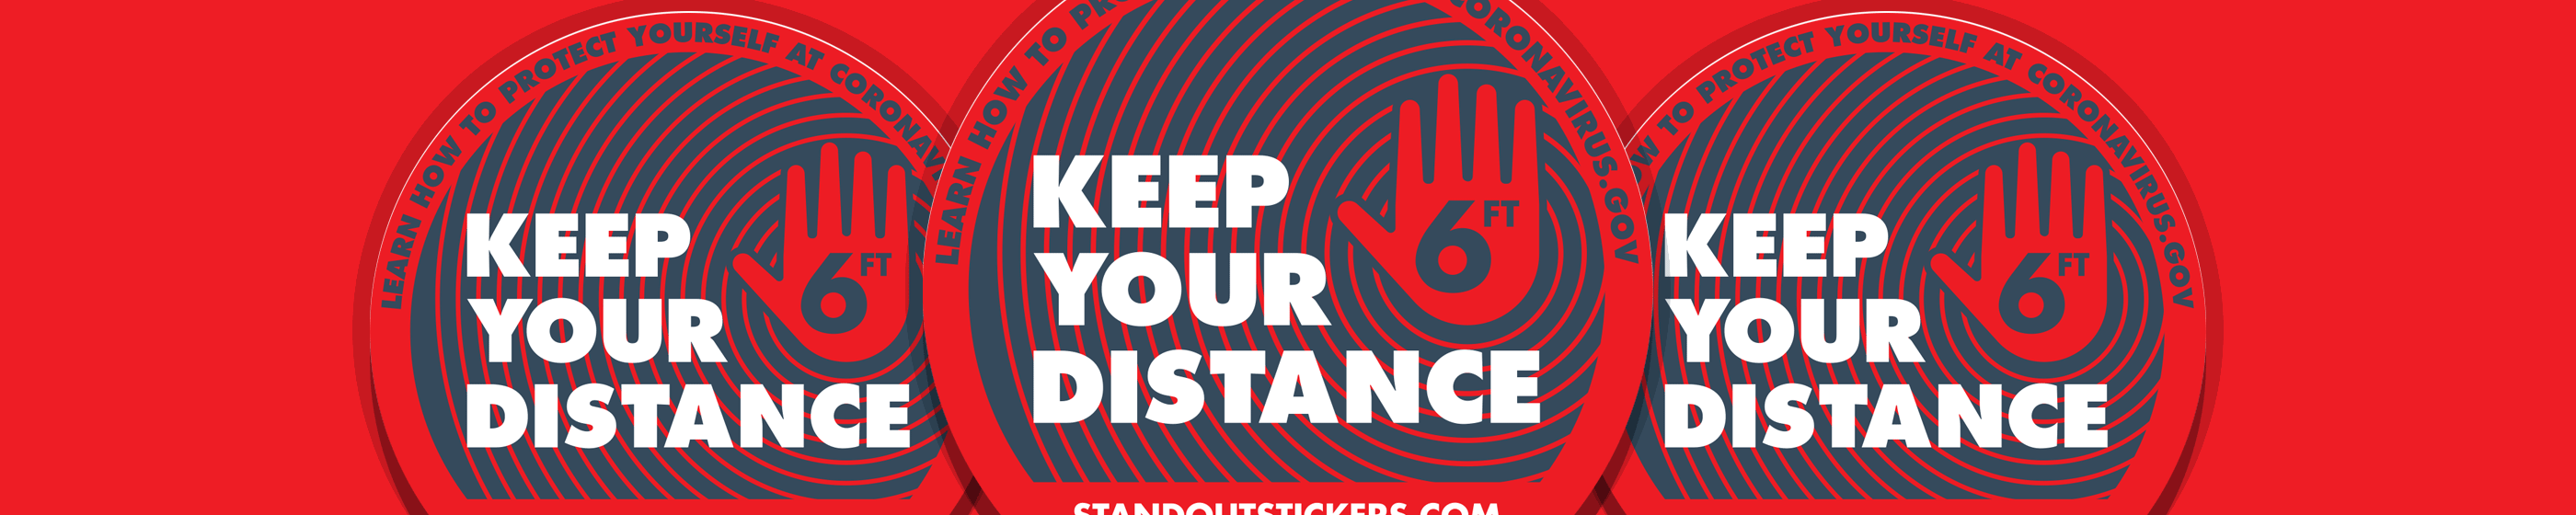 Keep Your Distance Sticker Cover Image